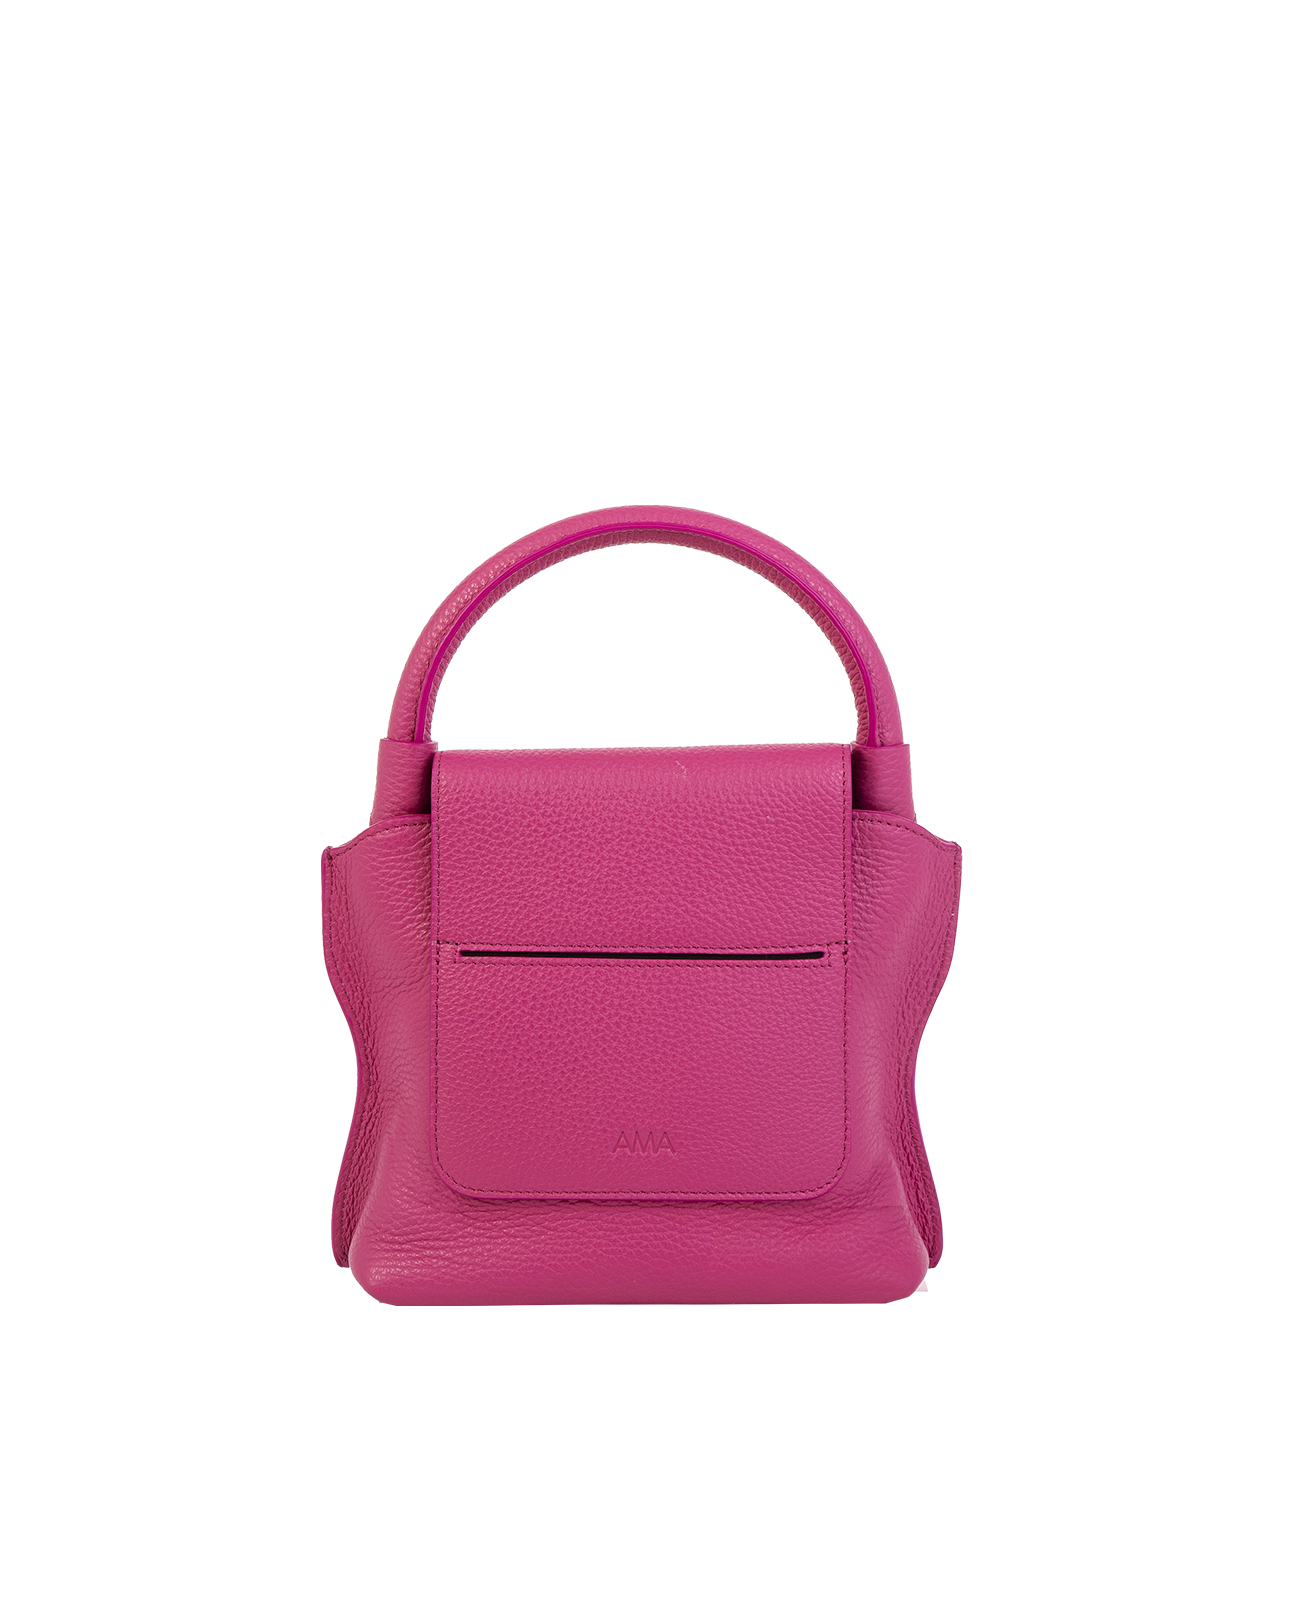 Cross-body bag in Italian full-grain leather, semi-aniline calf Italian leather with detachable shoulder strap.Three compartments, zip pocket in the back compartment. Magnetic flap closure with logo. Color: Pink. Size:Medium